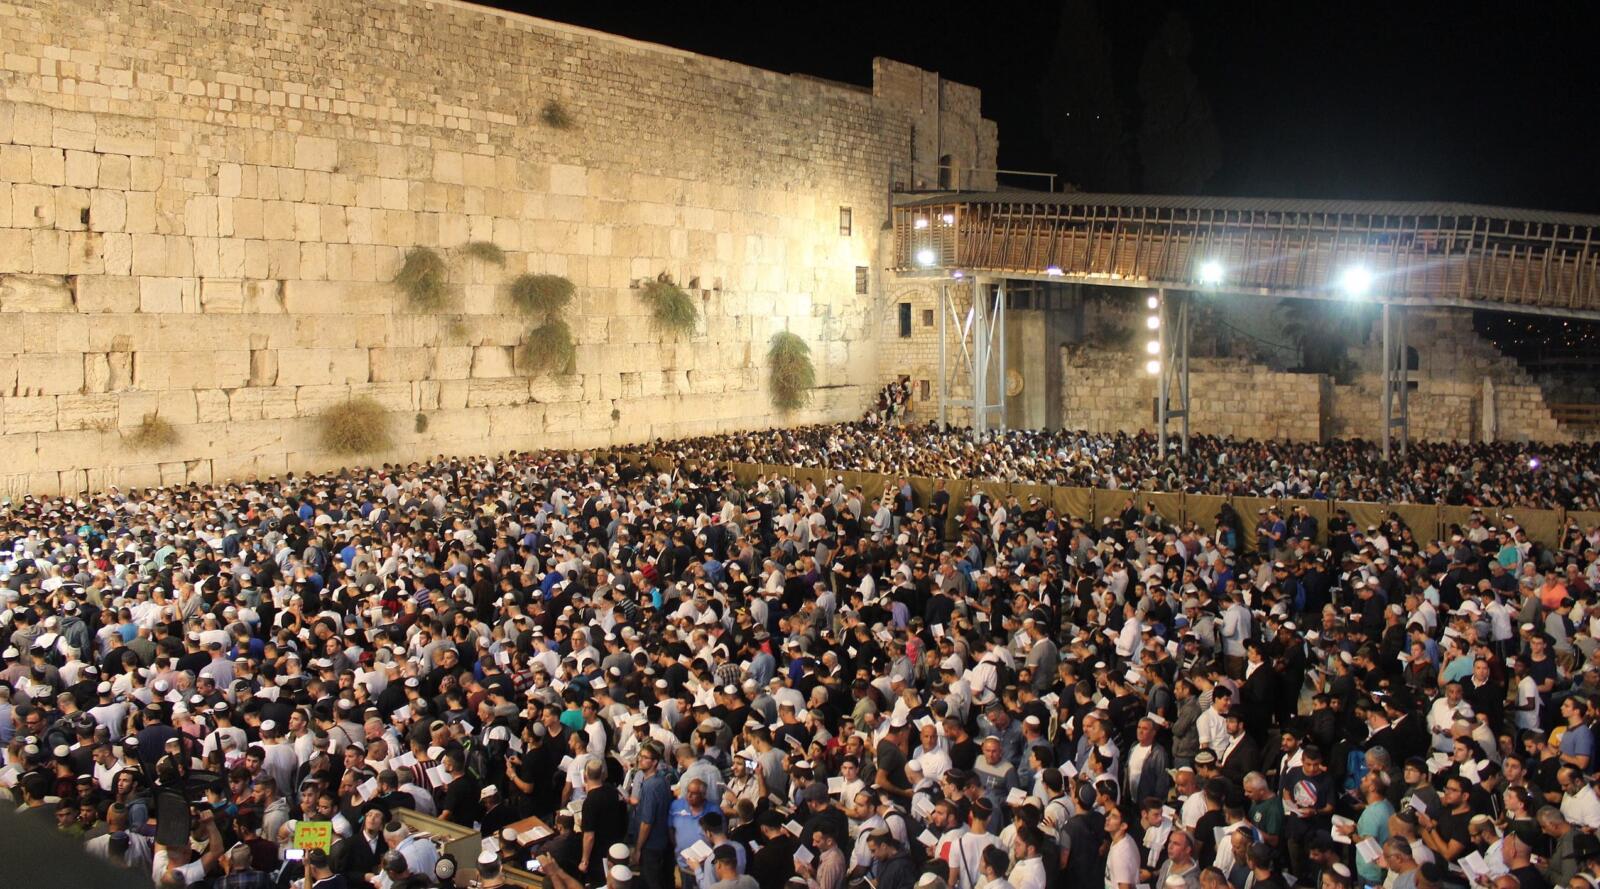 large crowd at the Western Wall at night